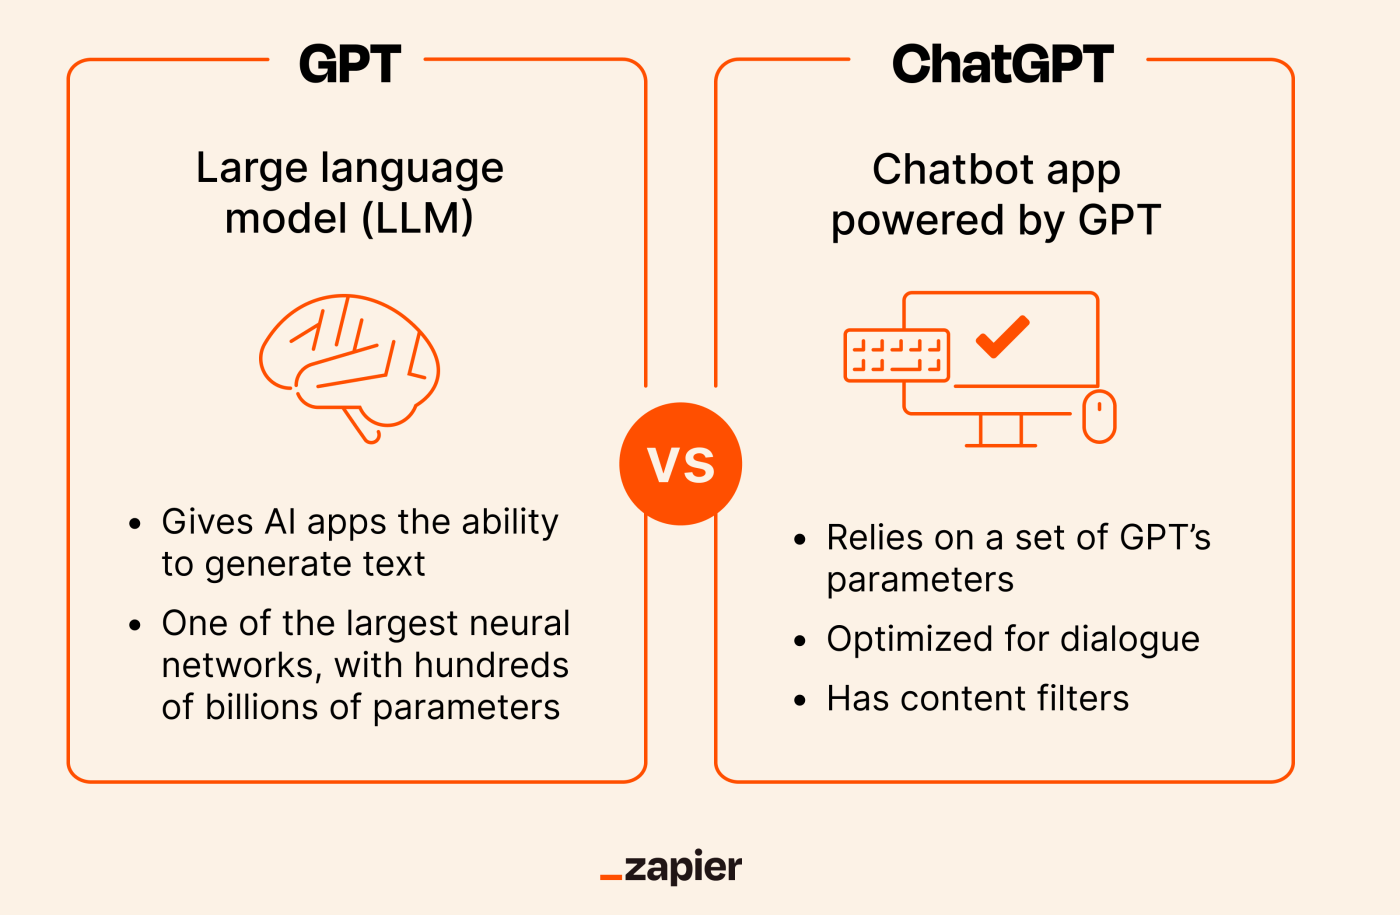 An infographic showing the differences between ChatGPT and GPT-3